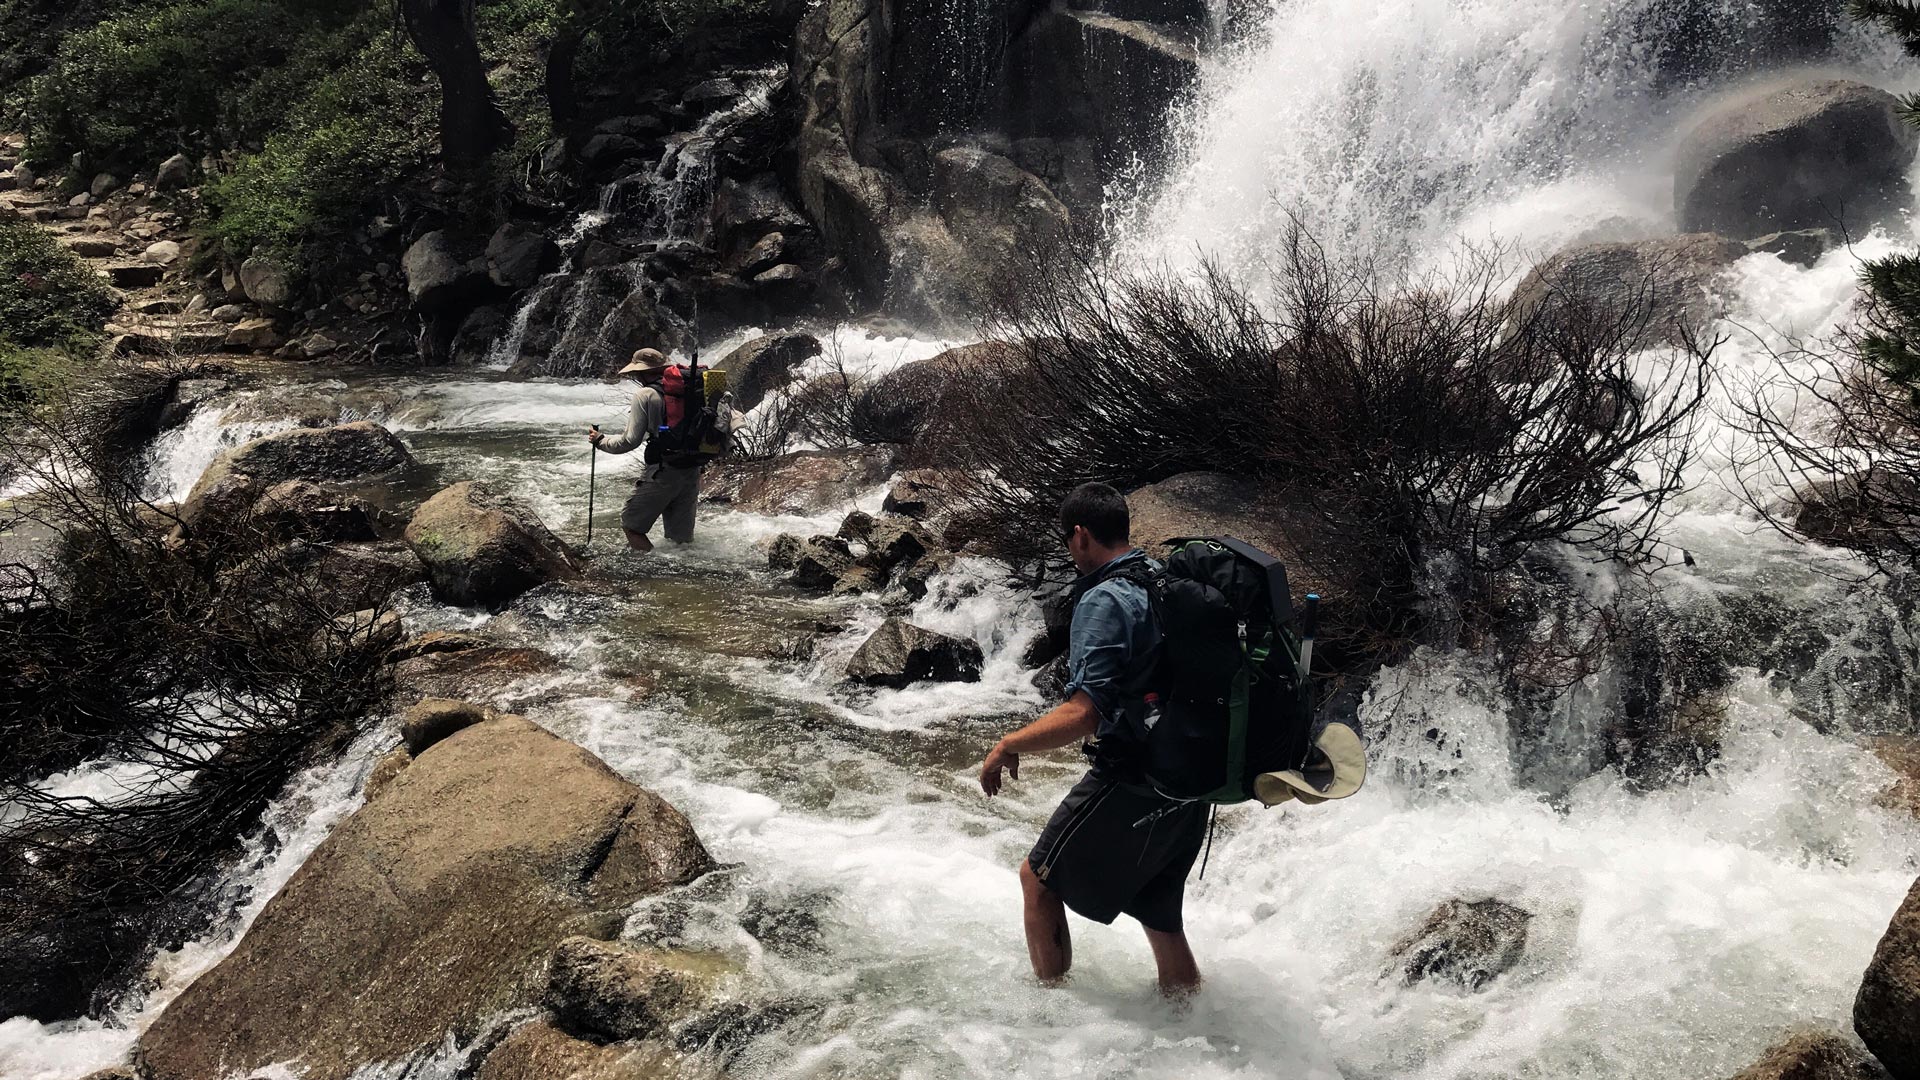 Two hikers attempt a safe crossing of a river while backpacking.